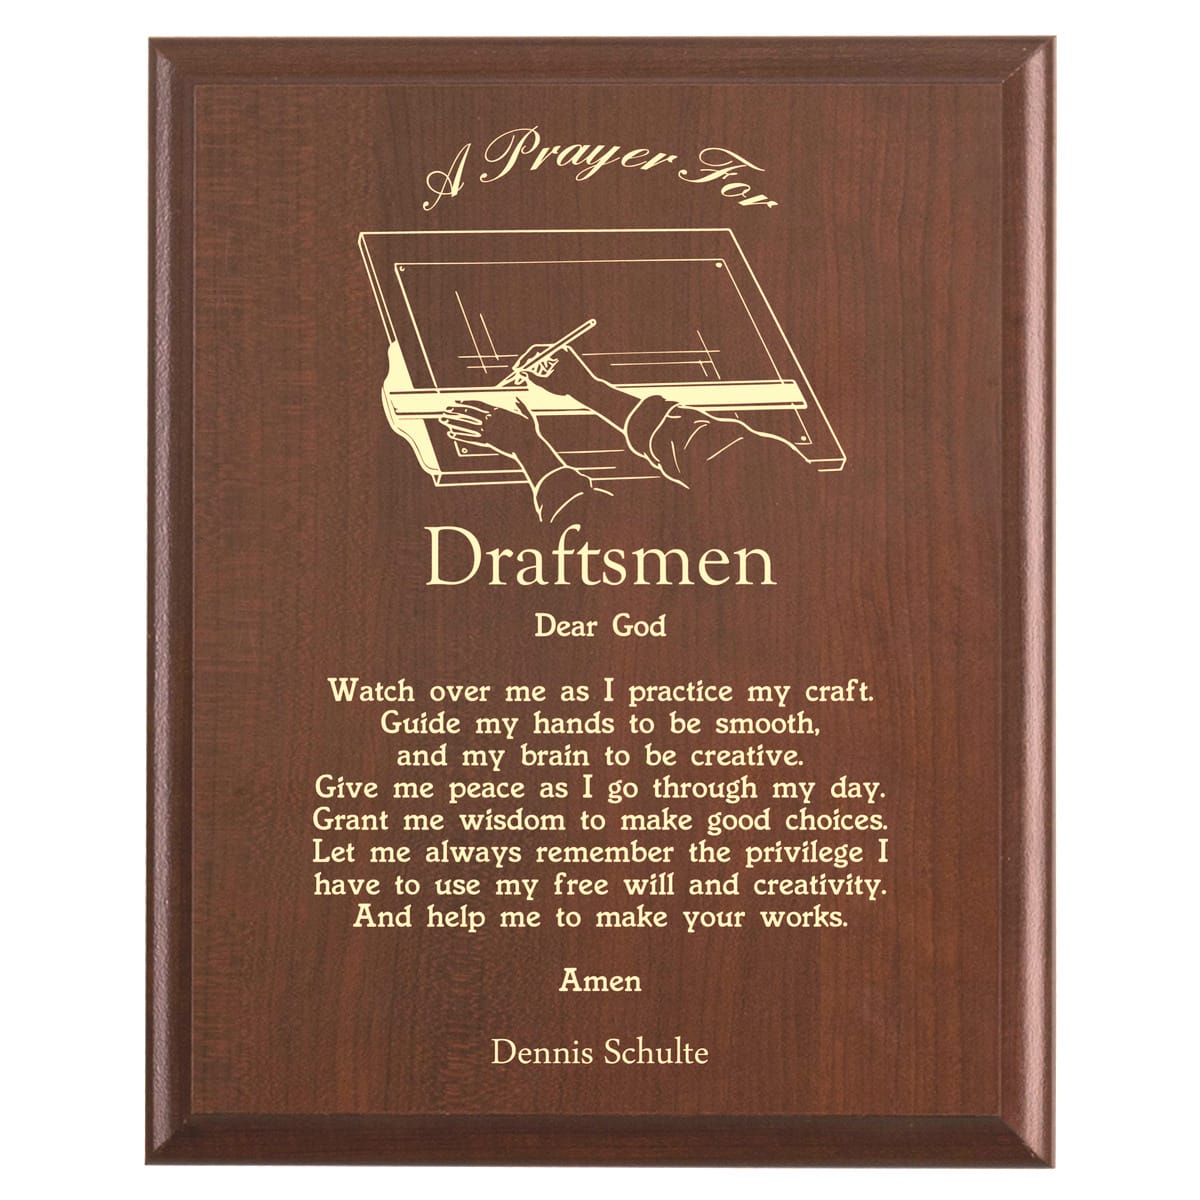 Plaque photo: Draftsman Prayer Plaque design with free personalization. Wood style finish with customized text.